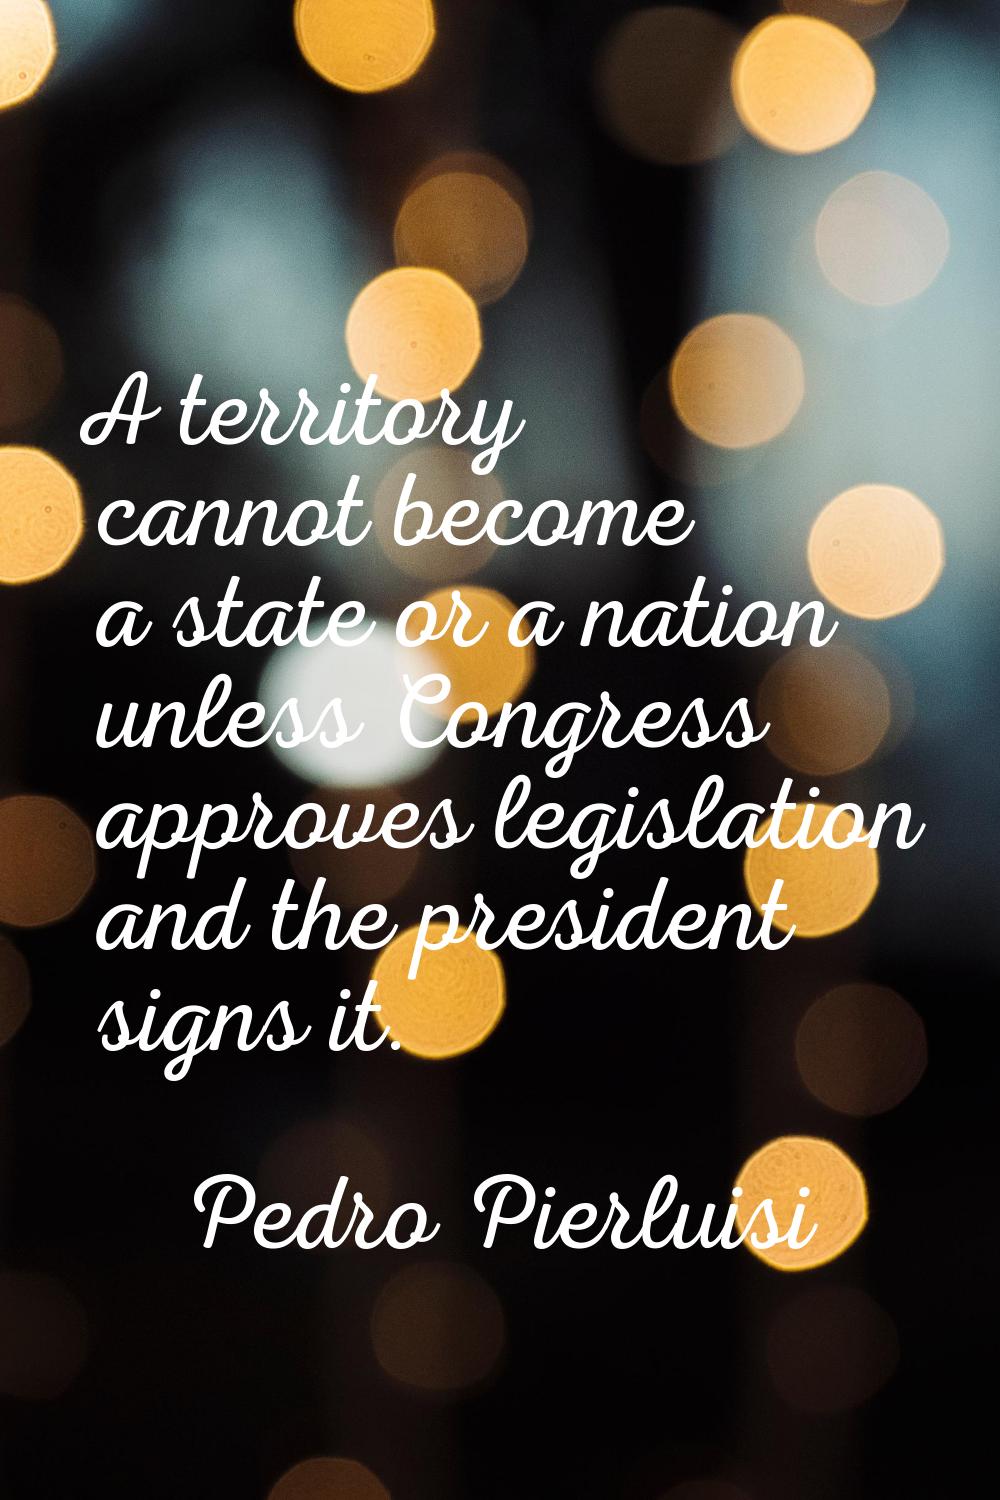 A territory cannot become a state or a nation unless Congress approves legislation and the presiden